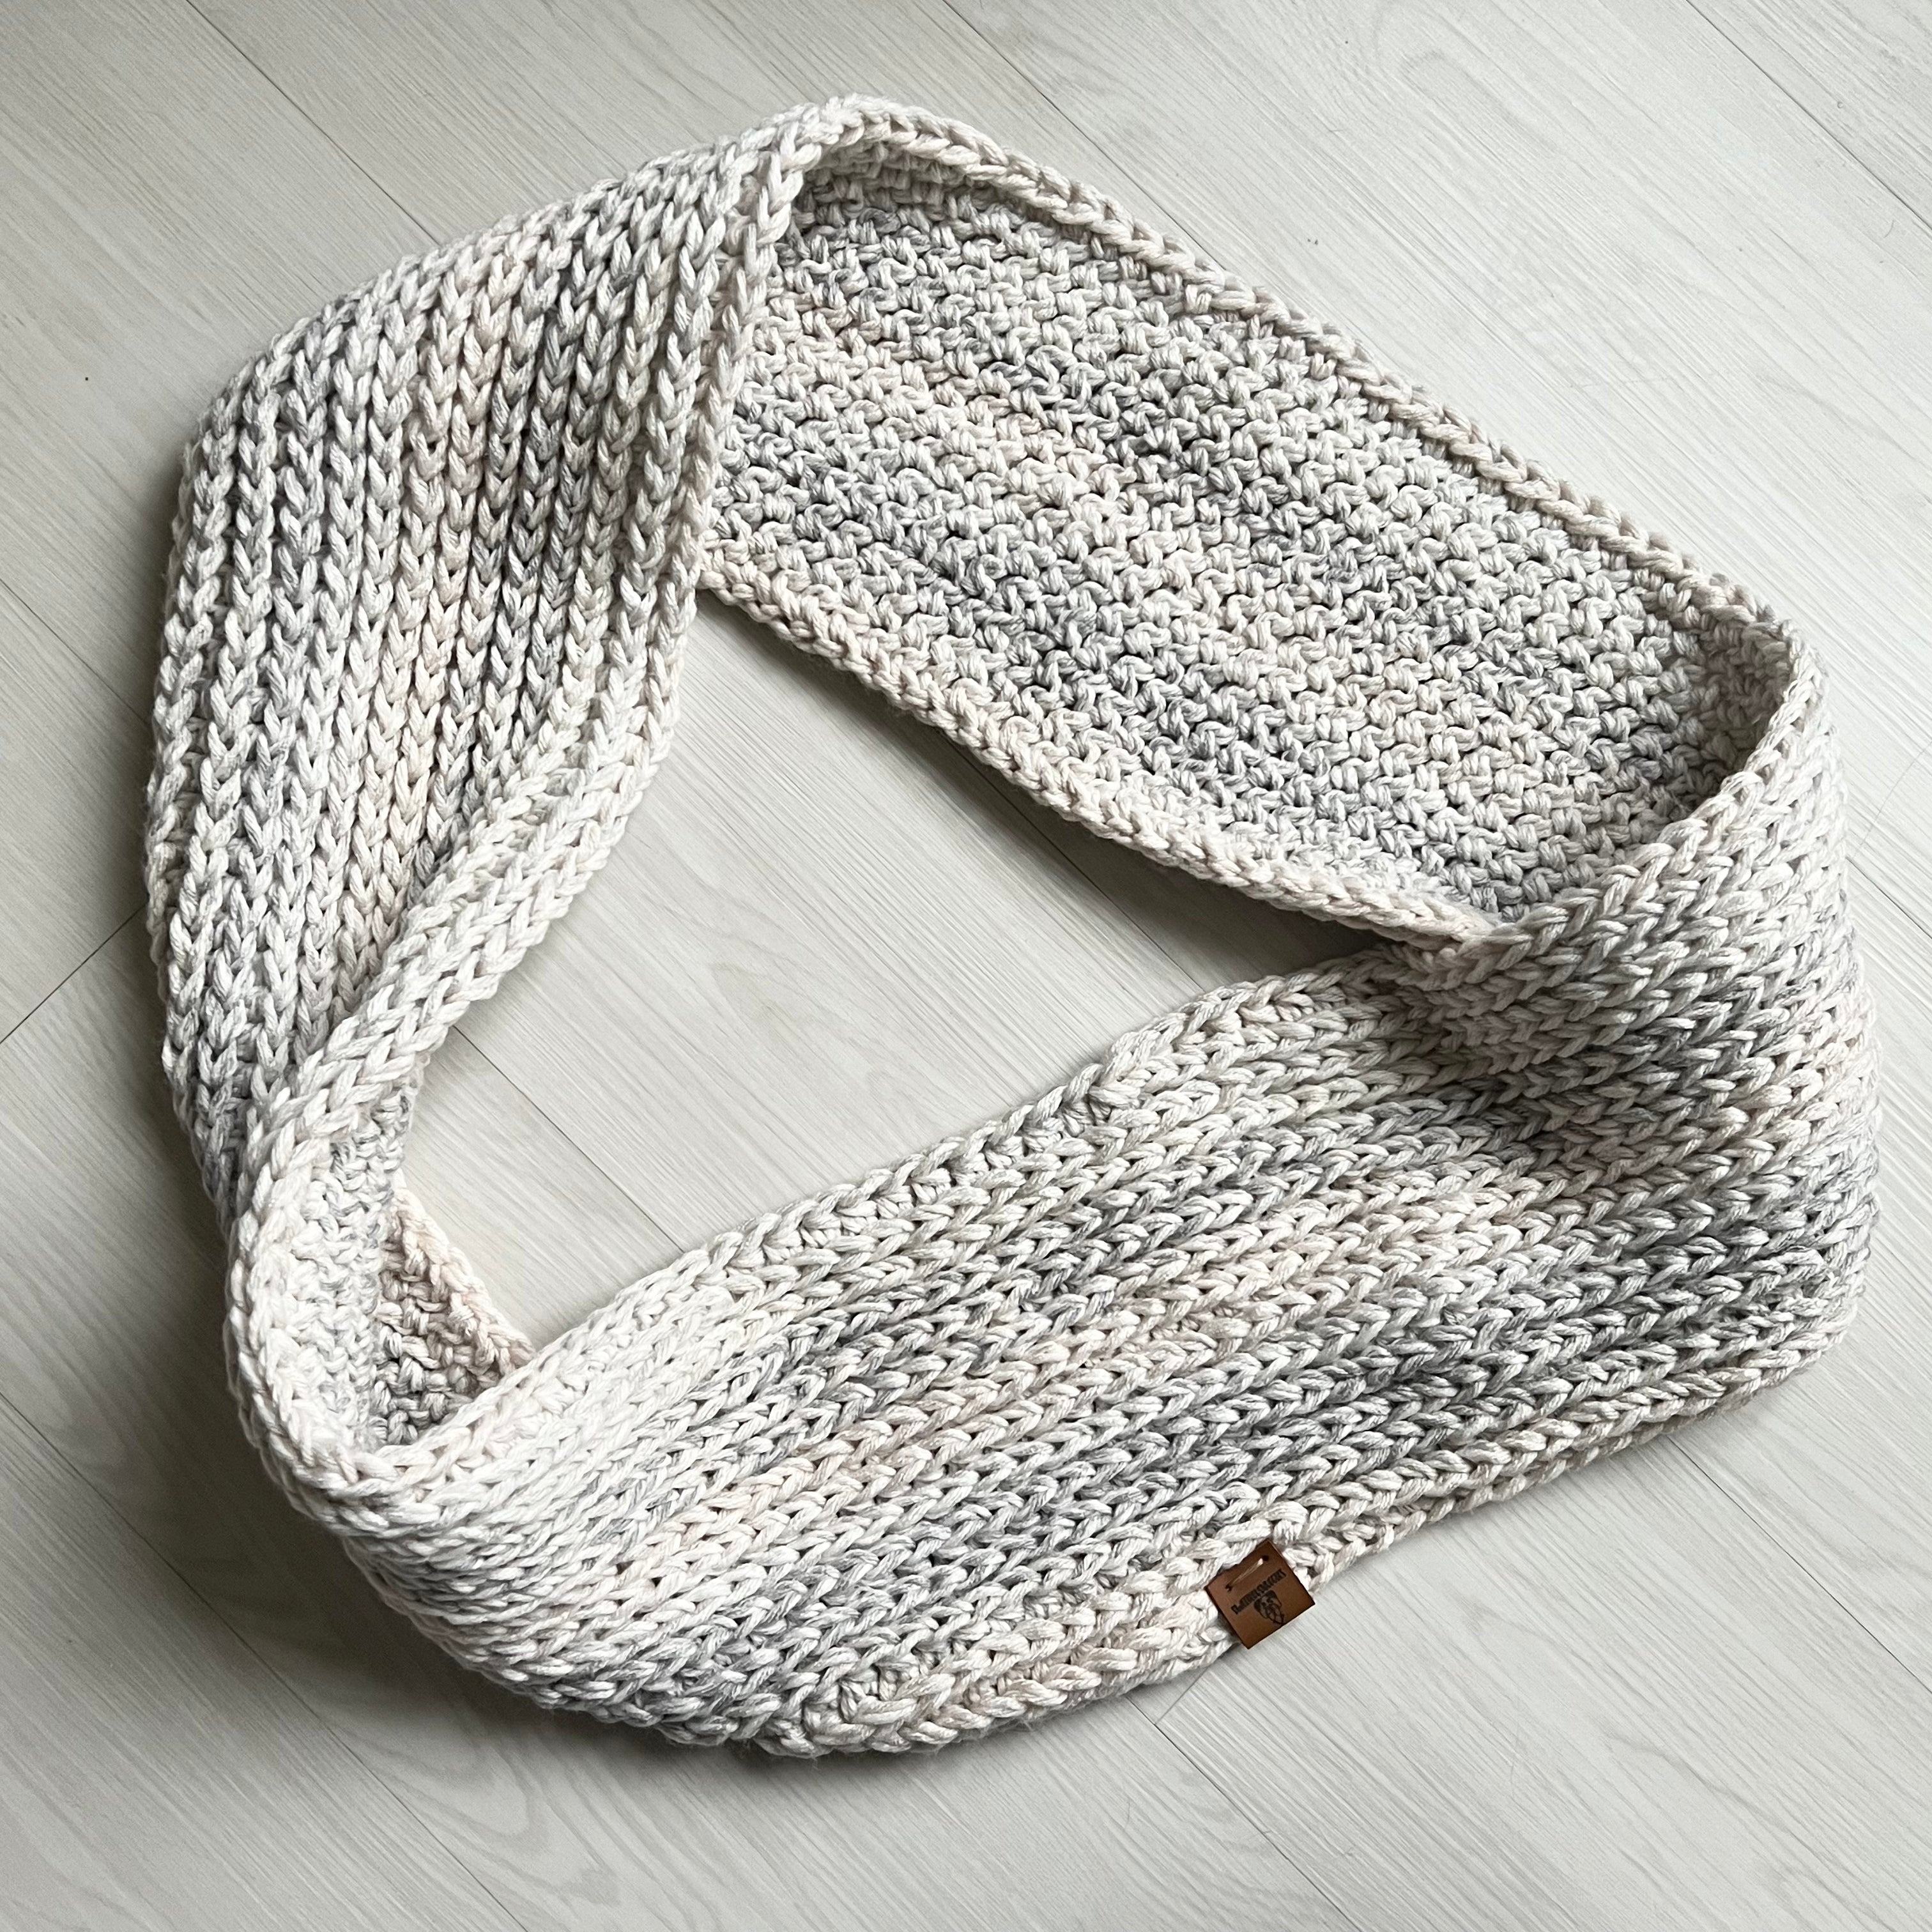 The Snowball Infinity Scarf